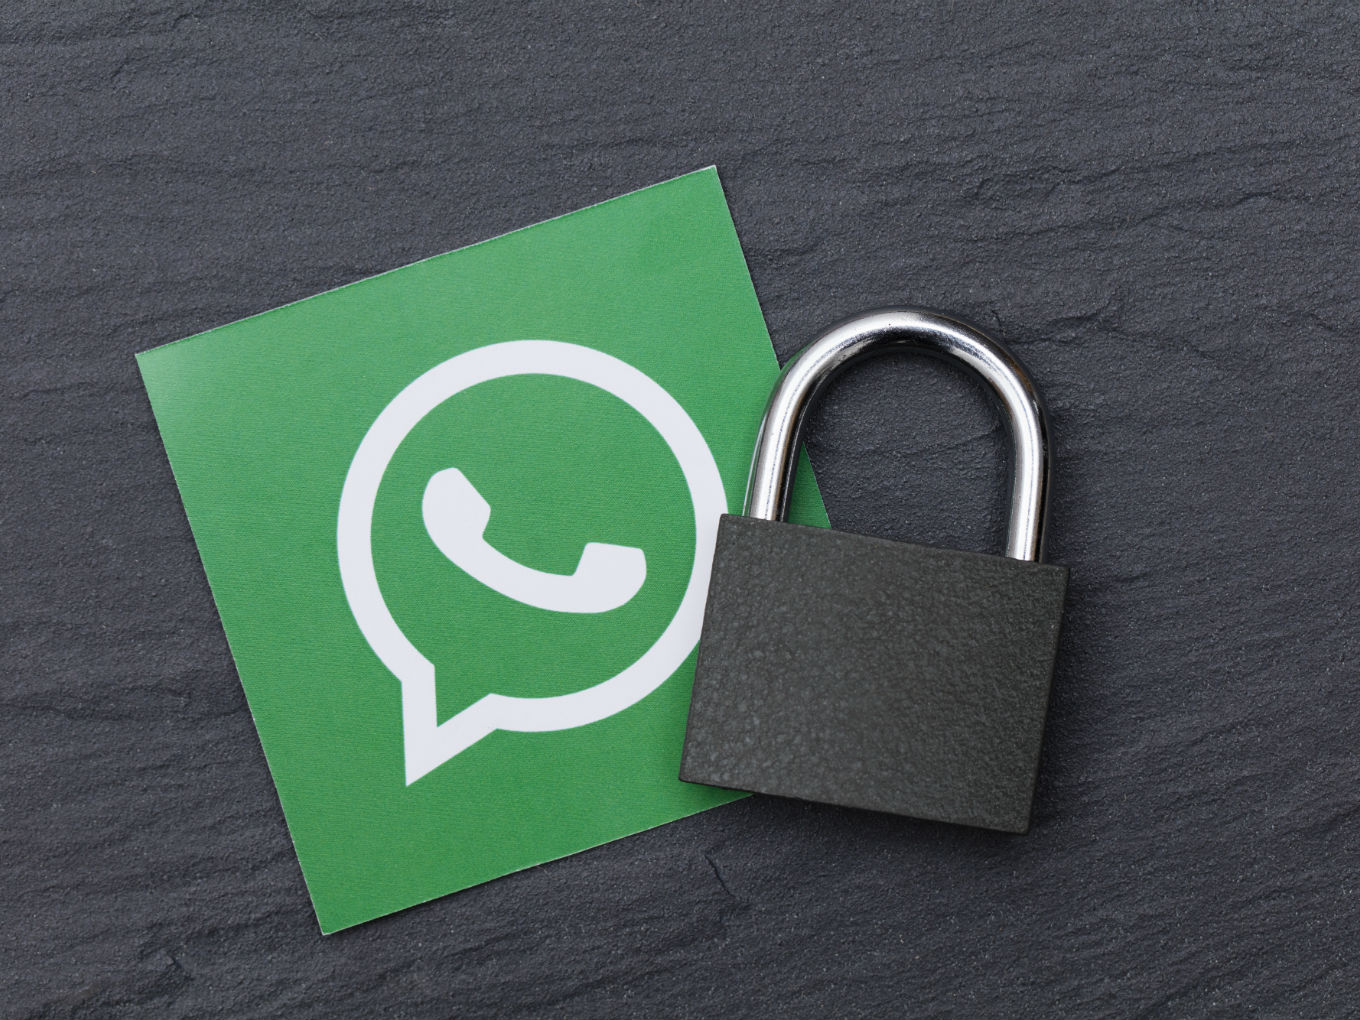 WhatsApp Mulling Legal Action Against Users For Spreading Fake News